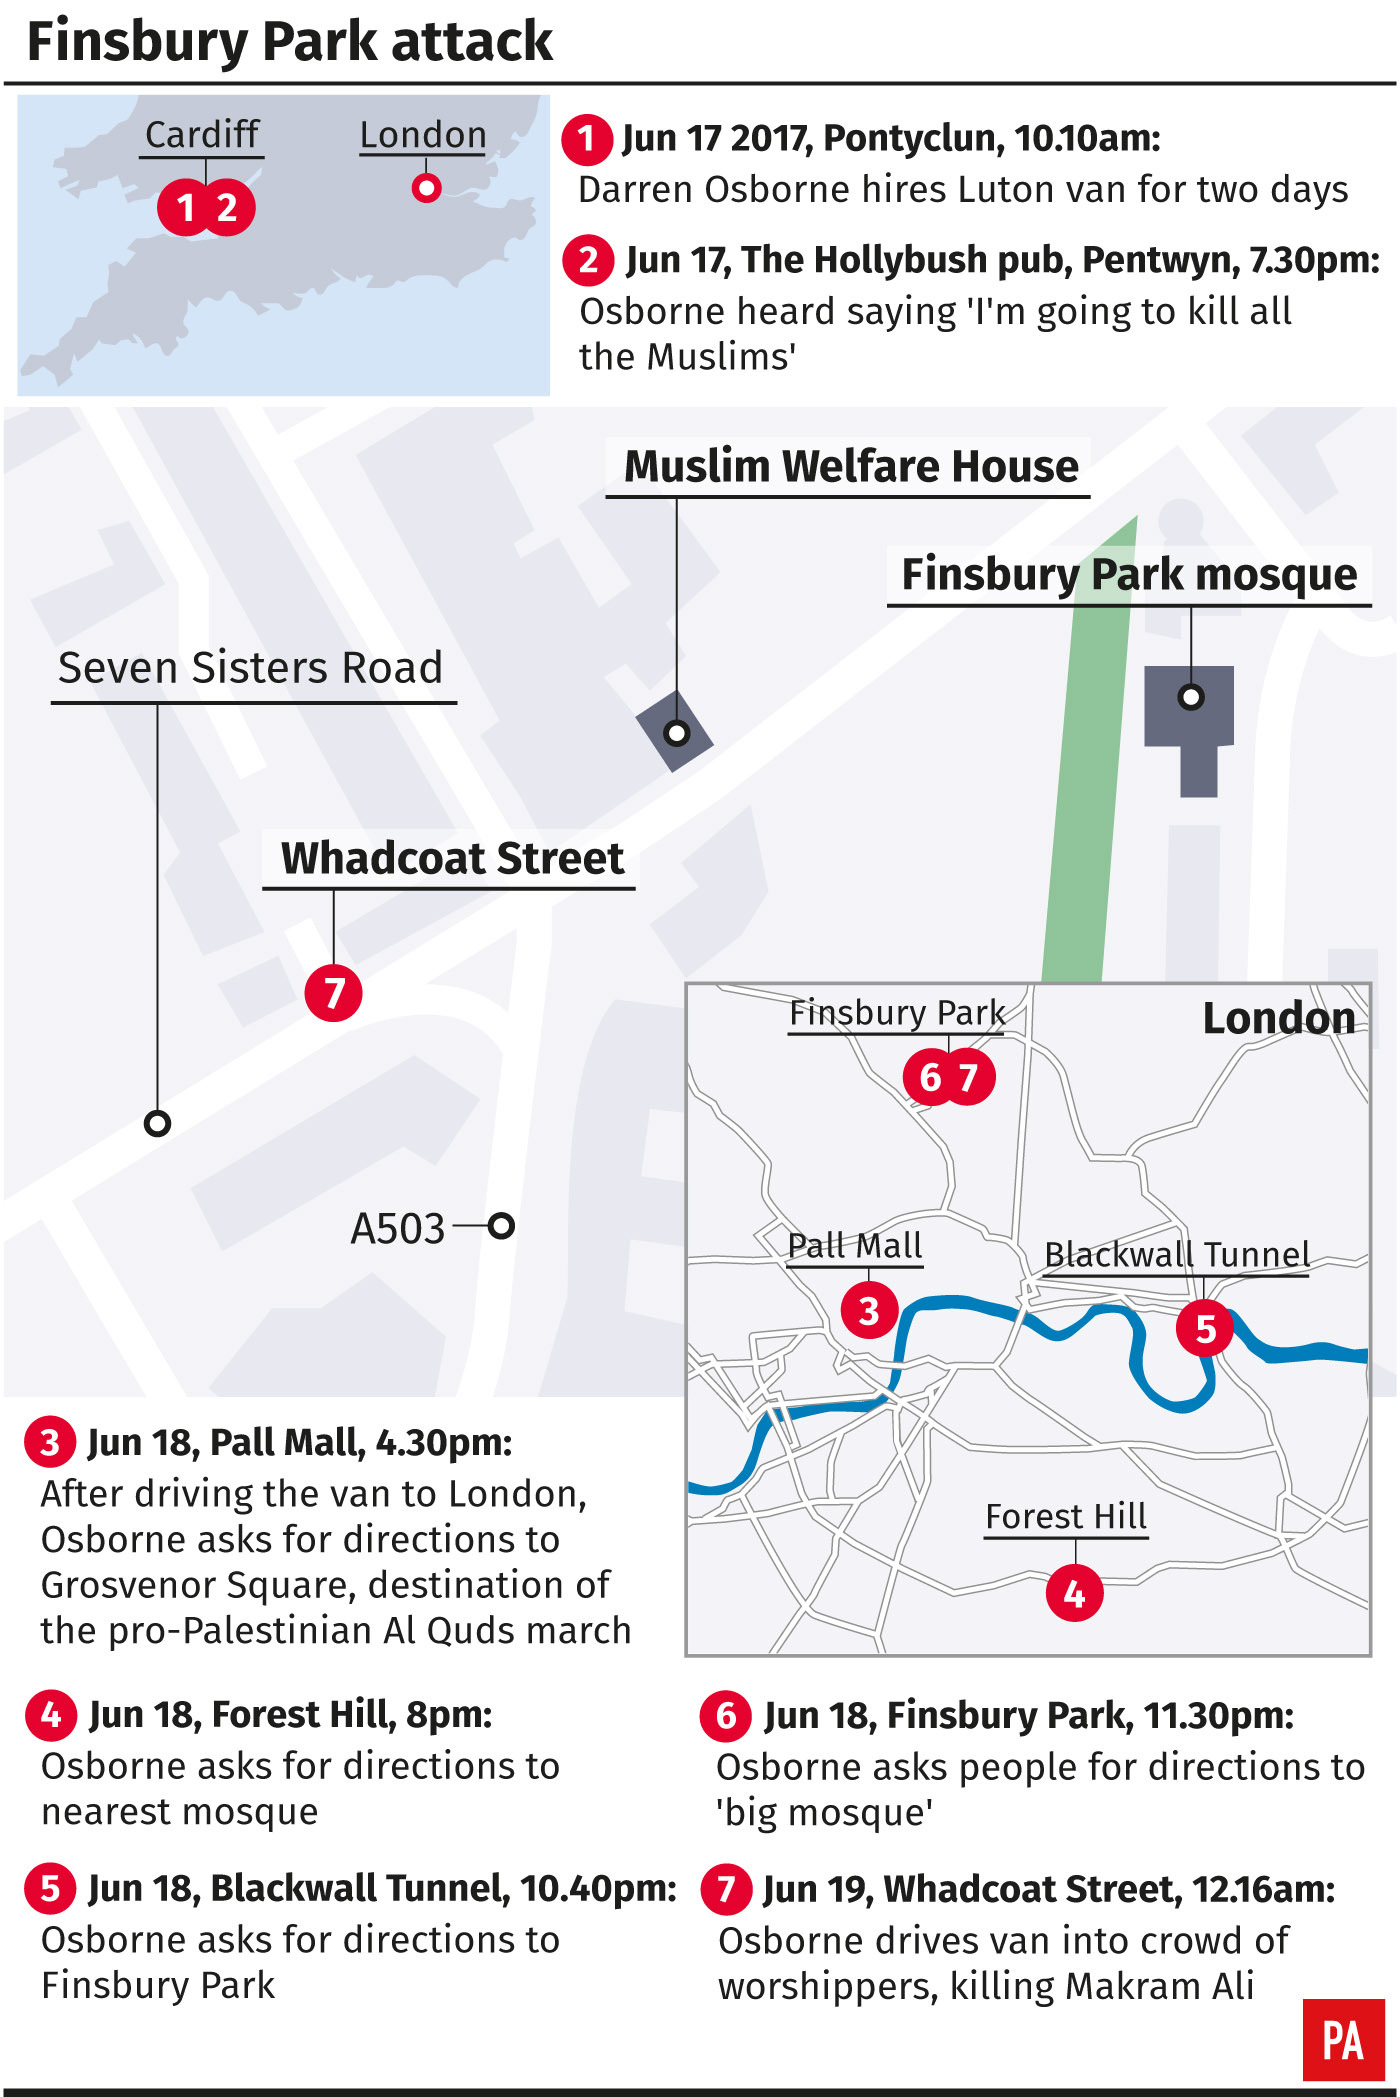 The Finsbury Park attack (Infographic by PA Graphics)